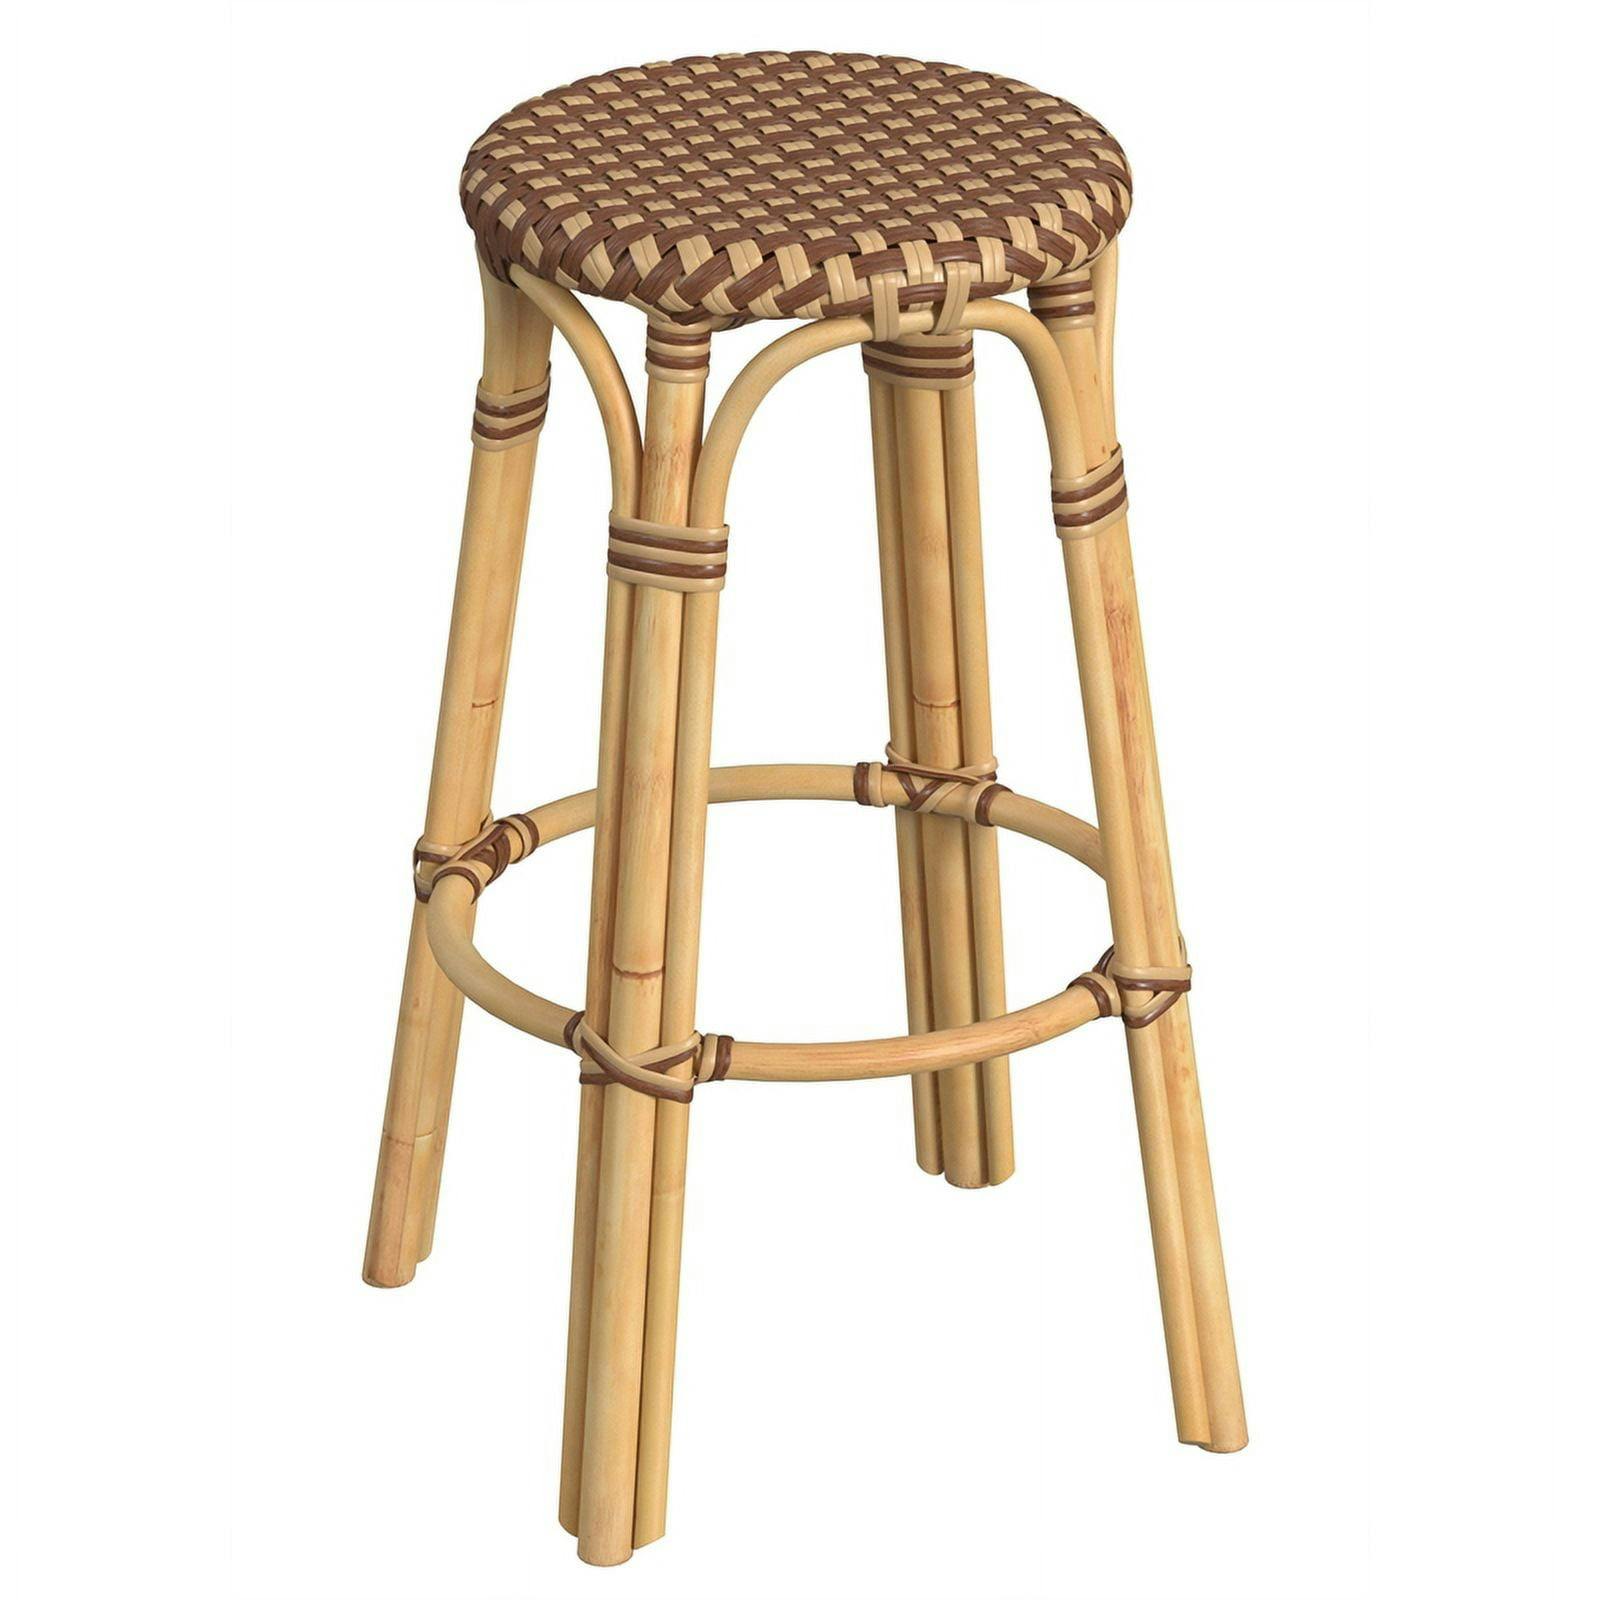 Cote d'Azur Inspired 30" Brown and Tan Rattan Round Bar Stool